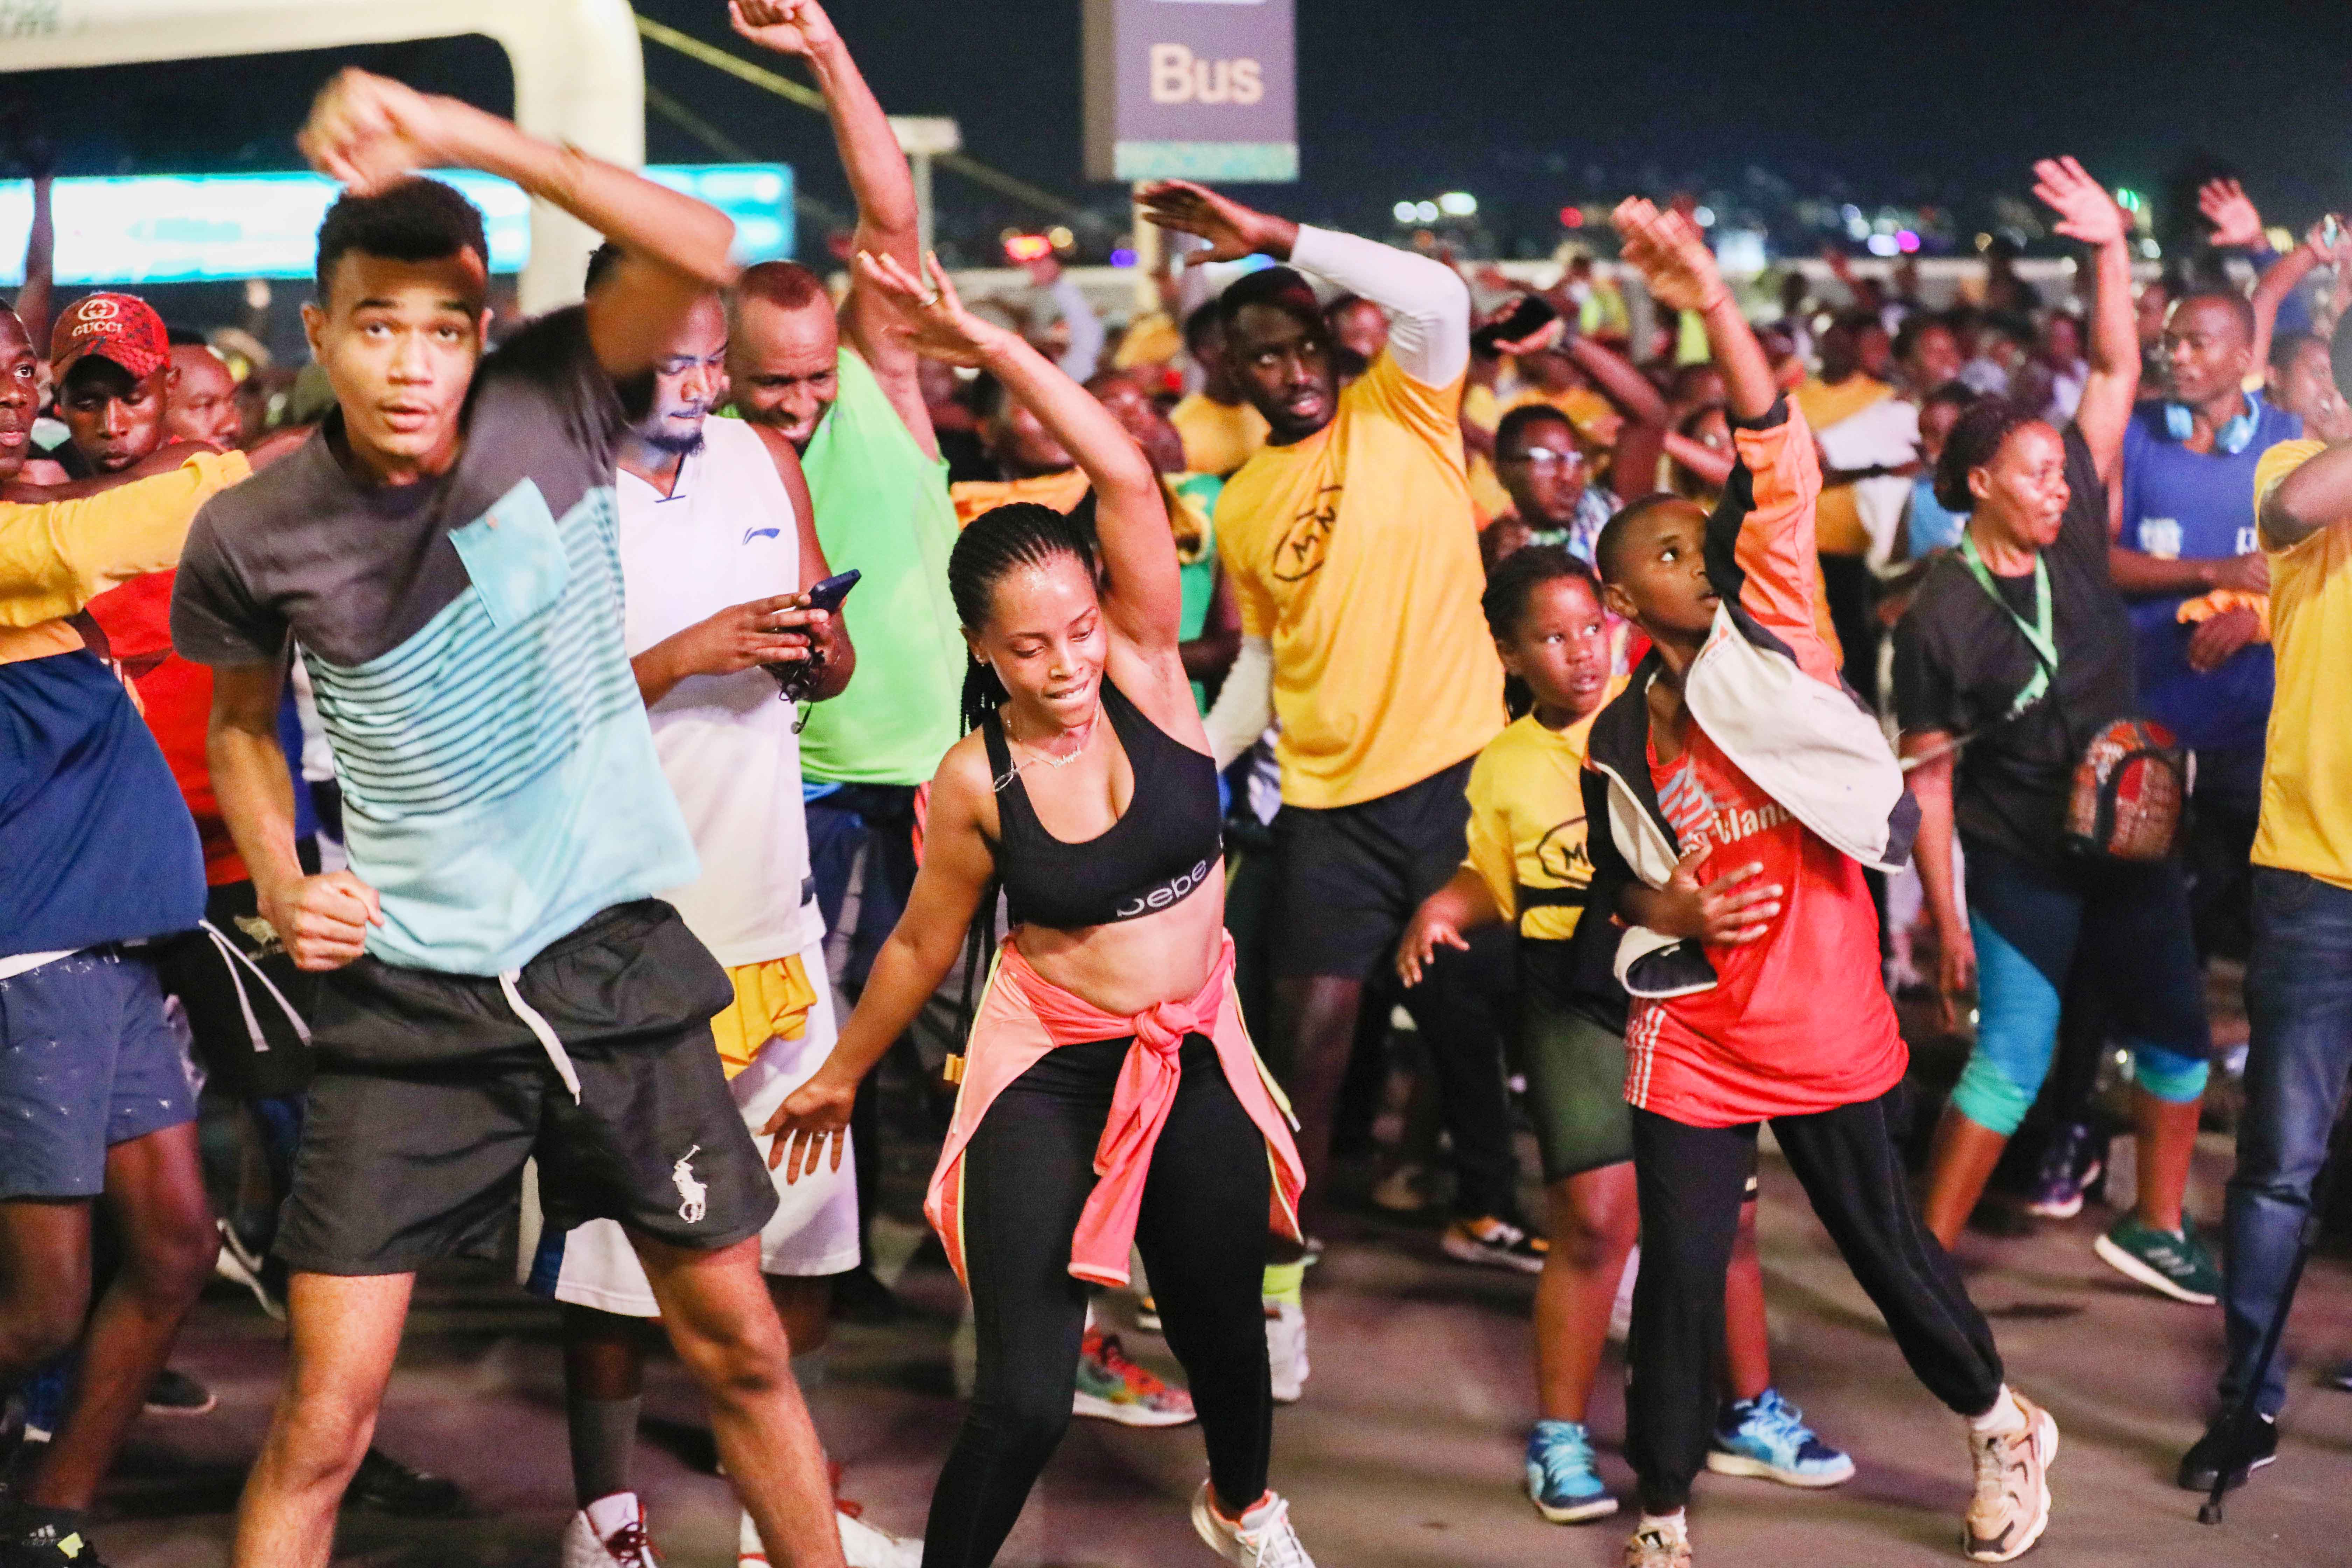 Kigalians and delegates of the CHOGM stretching their bodies matching their moves with the beat of the music during Kigali Night Run on Tuesday ,June 21. All photos by Dan Nsengiyumva